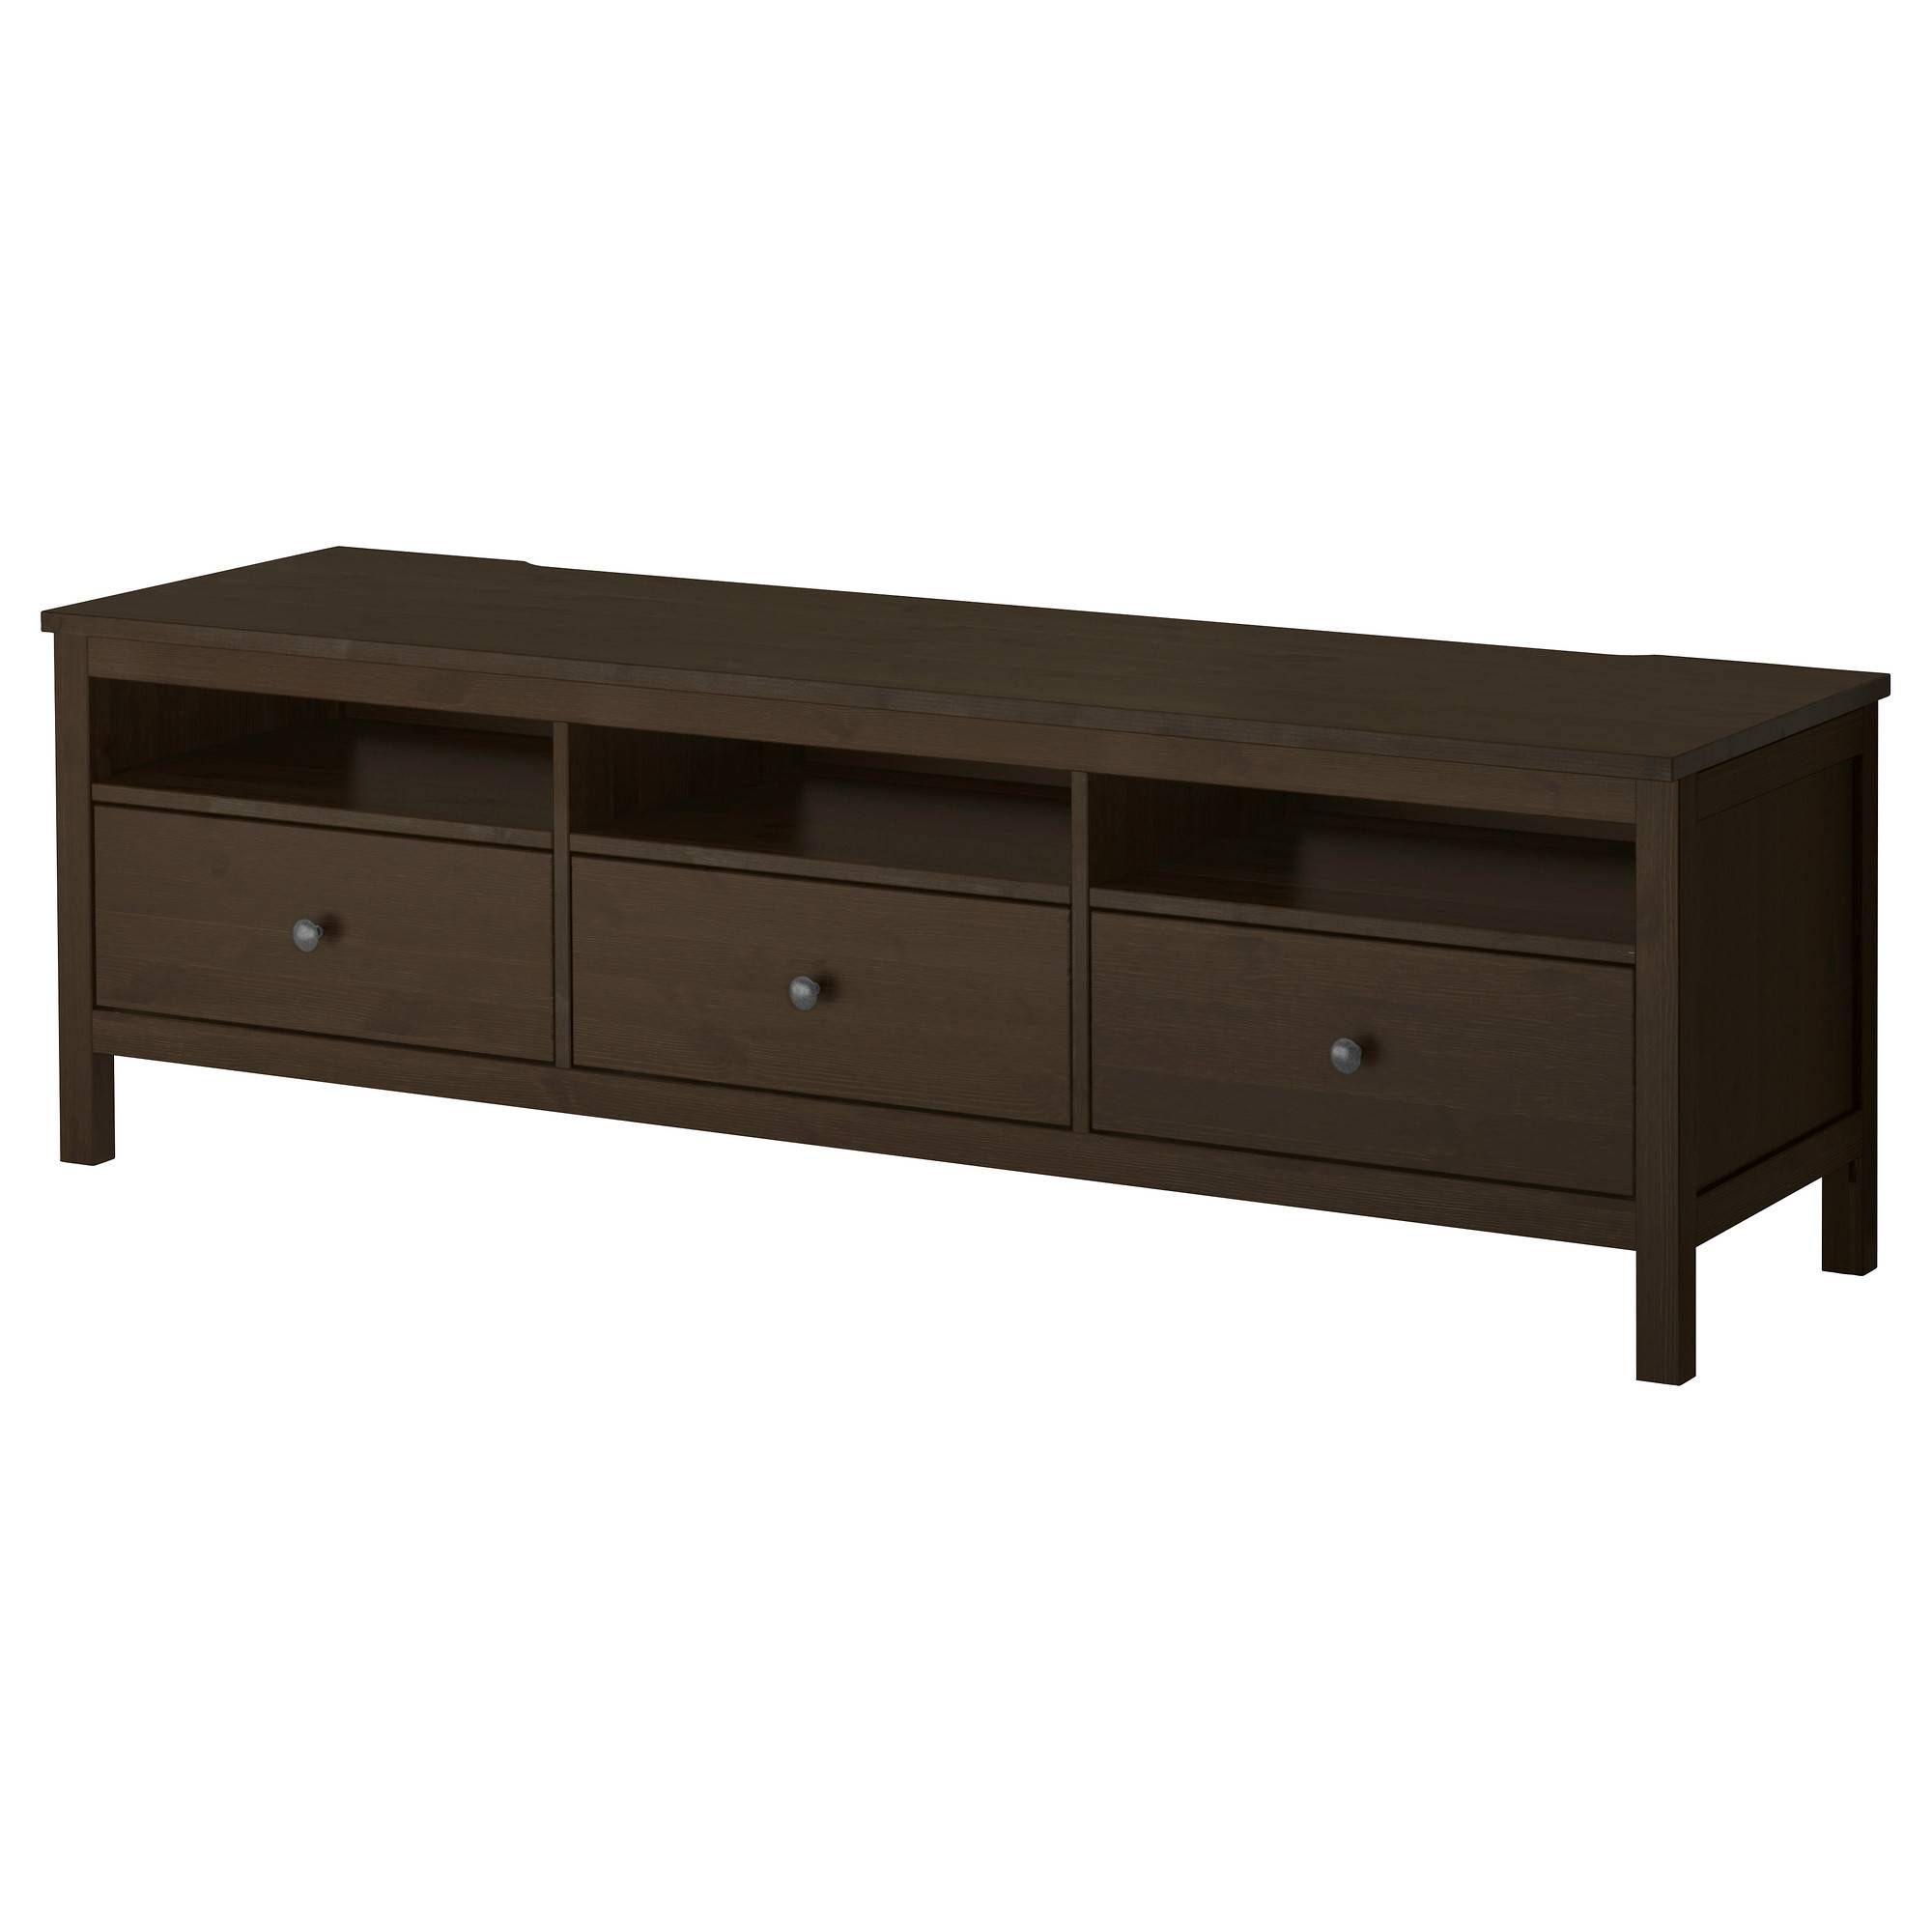 Hemnes Tv Bench Black Brown 183x47 Cm – Ikea With Small Black Tv Cabinets (View 7 of 15)